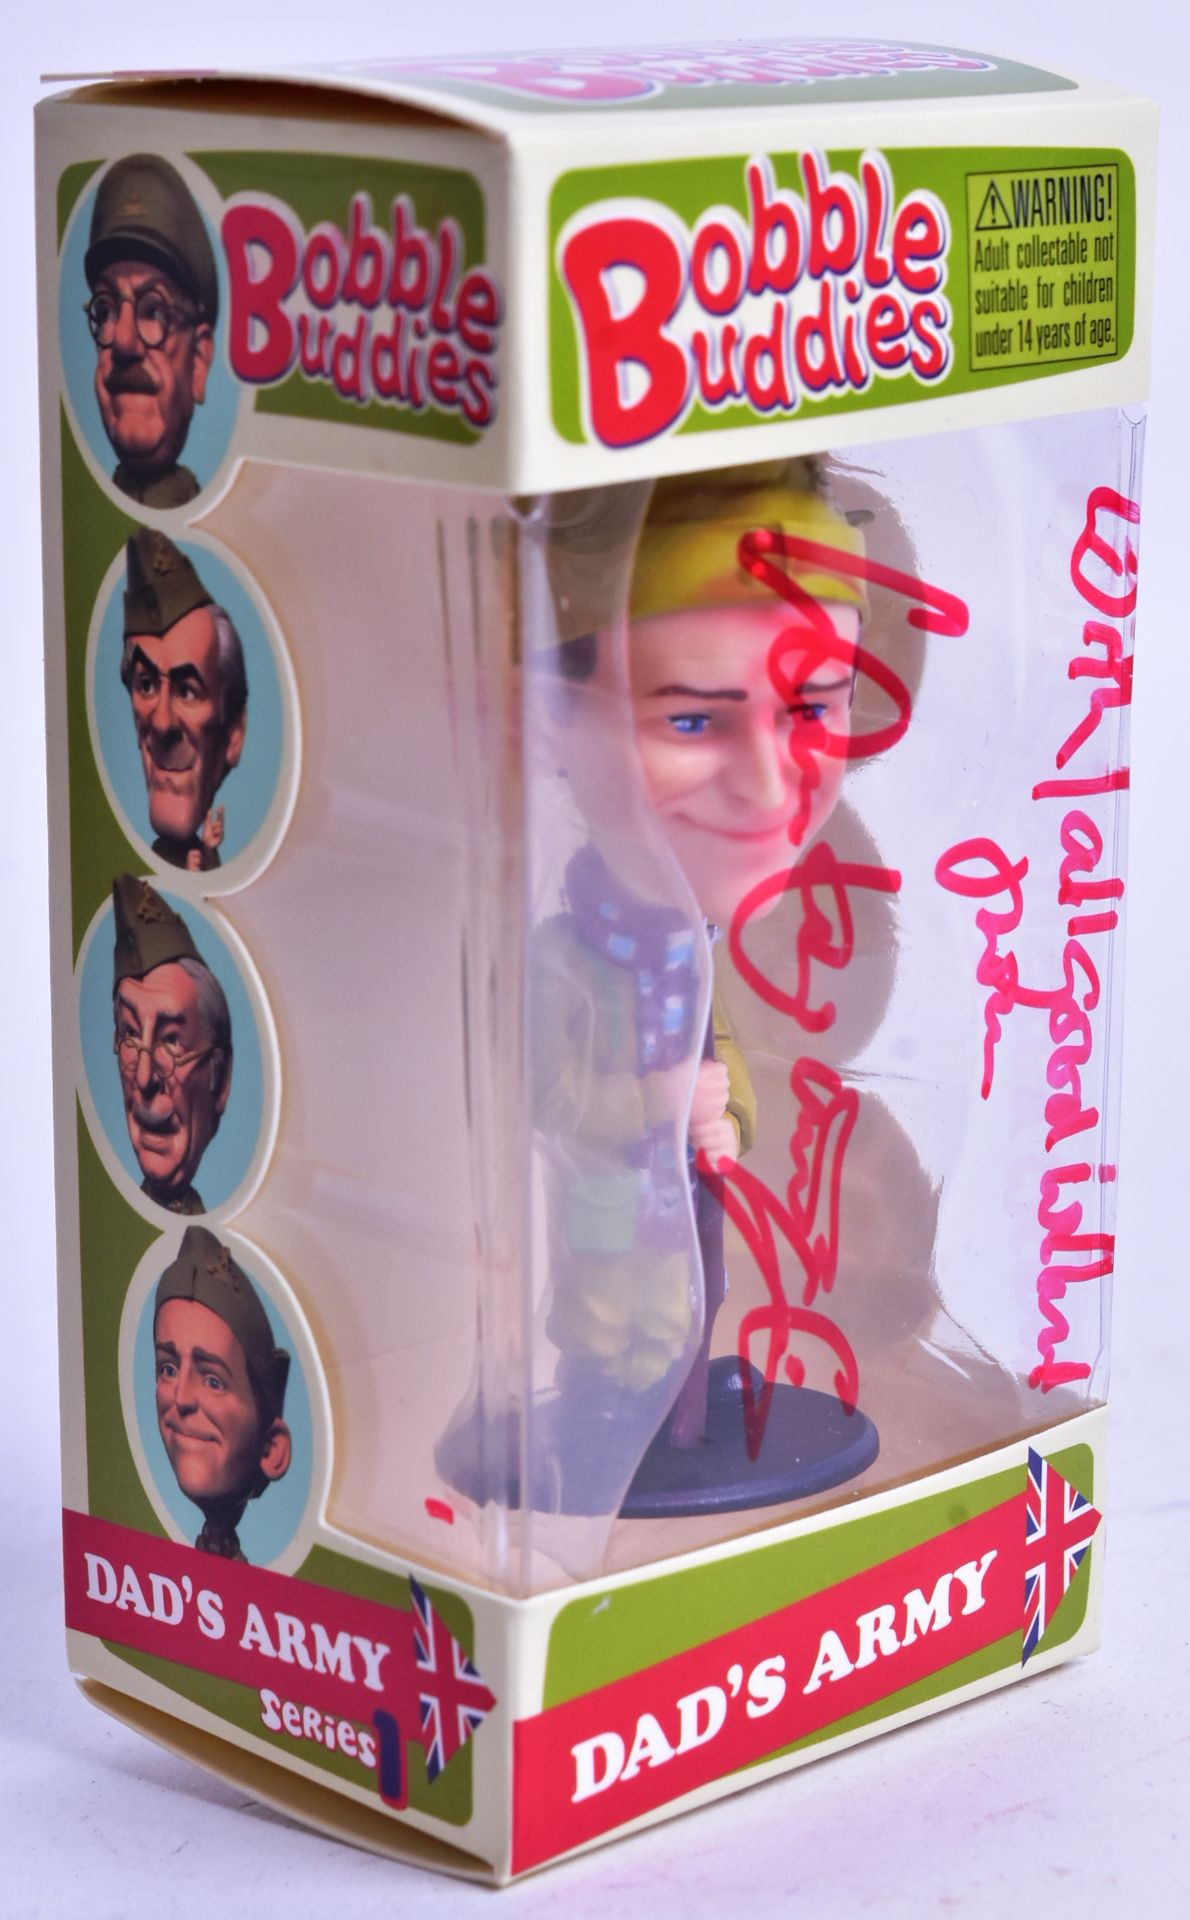 DAD'S ARMY - BOBBLE BUDDIES - IAN LAVENDER SIGNED FIGURE - Image 3 of 4